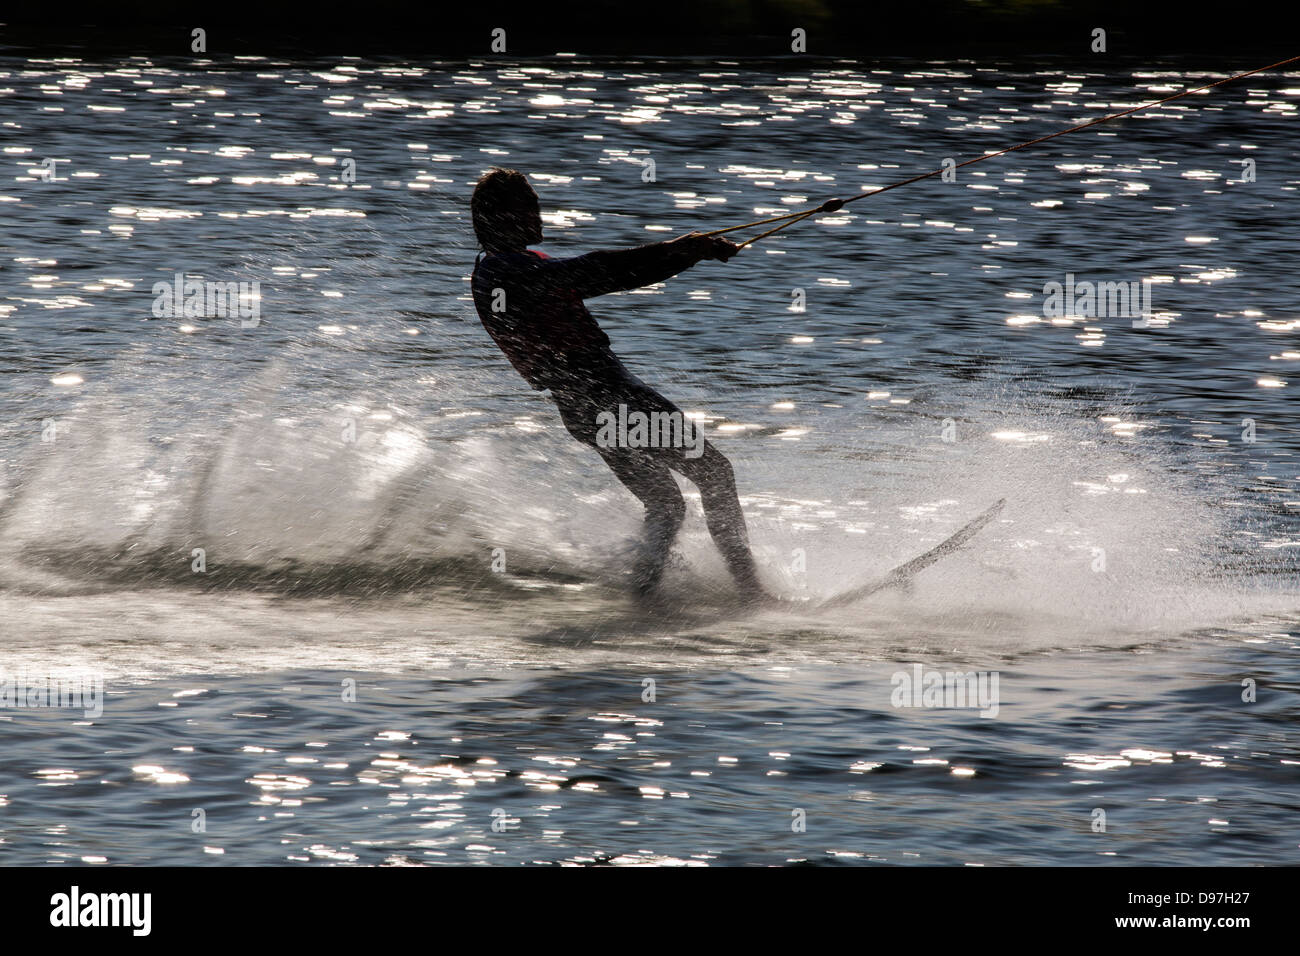 Water ski, beginners are drawn from the automatic towing unit on the water. Stock Photo